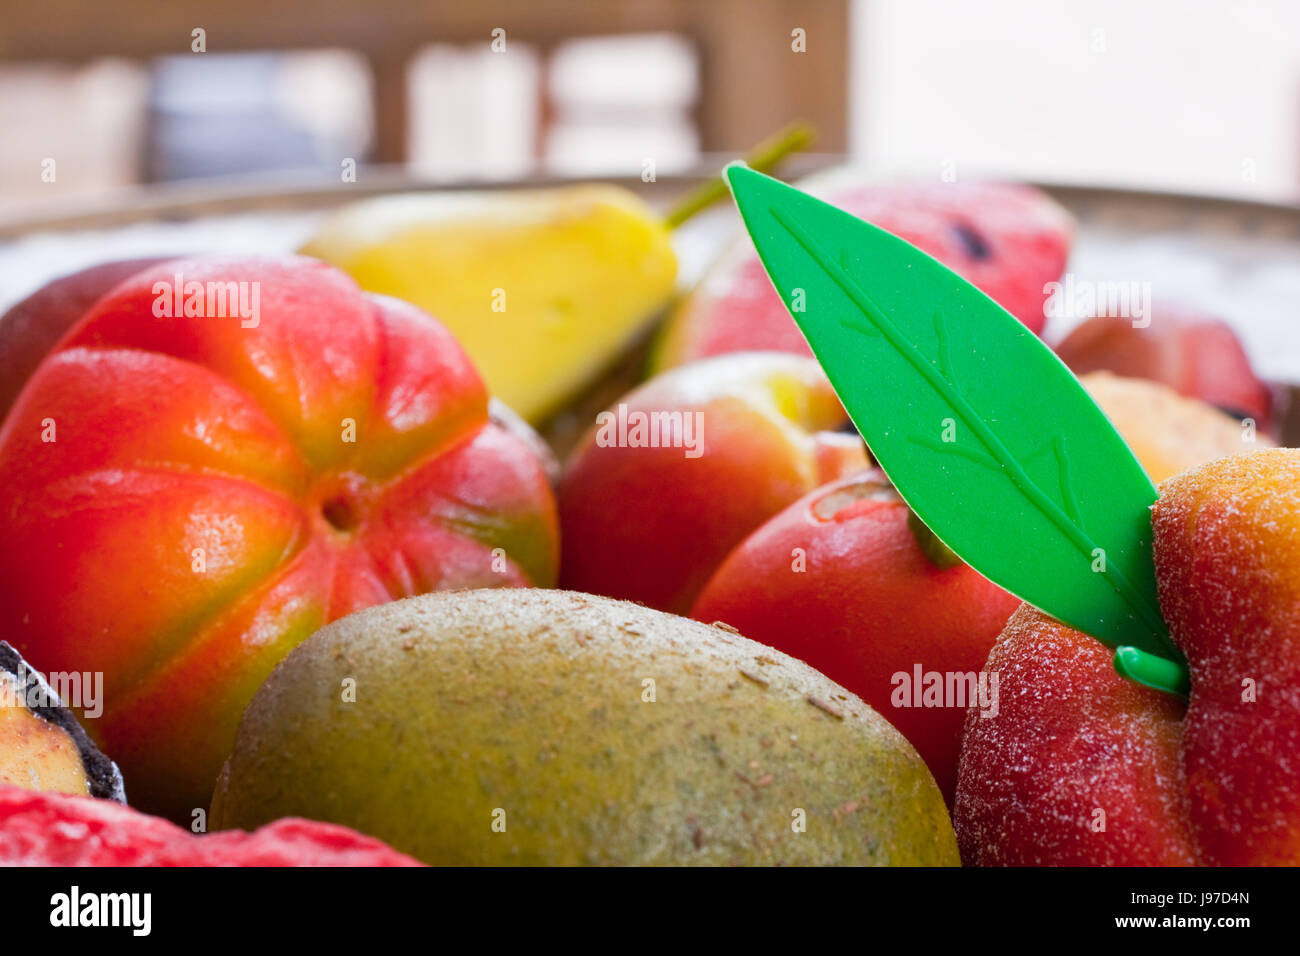 food, aliment, sweet, progenies, fruits, pastry, food, aliment, sweet, sweets, Stock Photo